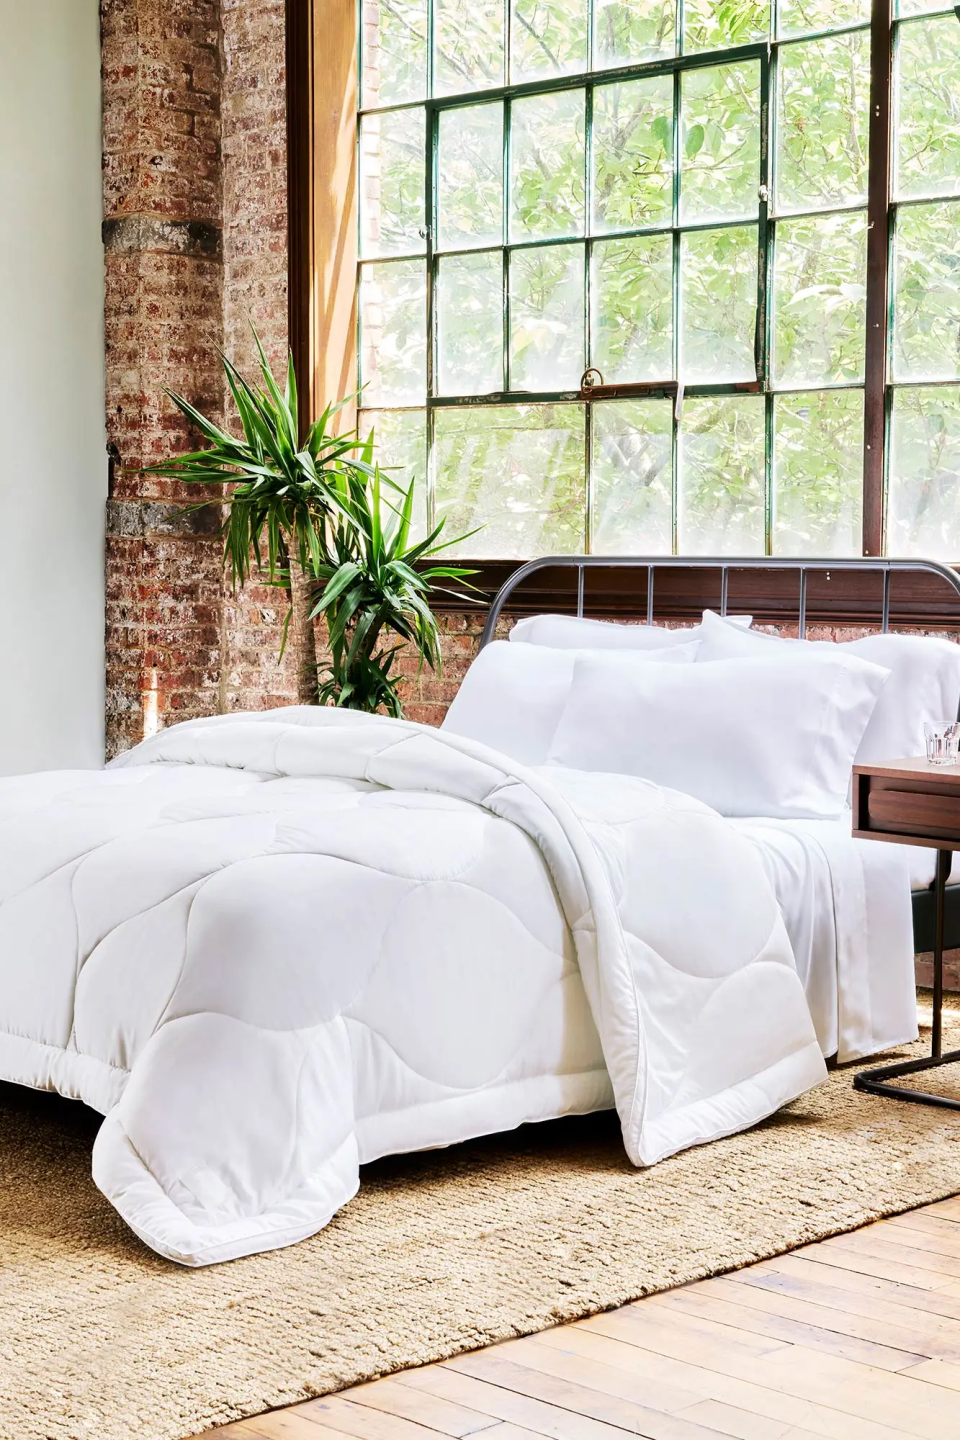 <h2>Buffy Cloud Comforter</h2><br>You've probably already heard about Buffy, but have you tried the cloud comforter? It has that name for a reason; the company aims to make you feel as comfortable as possible, without making our home base plant Earth uncomfy. The website states: "Each Buffy Cloud Comforter keeps 50 plastic bottles out of landfill thanks to 100% recycled, extra-fluffy fill sourced in Estonia." <br><br><strong>The Hype:</strong> 4.8 out of 5 stars and 22,614 reviews on <a href="https://go.skimresources.com?id=30283X879131&xs=1&url=https%3A%2F%2Fbuffy.co%2Fproducts%2Fthe-buffy-comforter-trial%2F12284557230178%3Fadgroupid%3D79142958716%26adid%3D387344208933%26campaignid%3D6679319704%26currency%3DUSD%26gclid%3DCj0KCQiAhZT9BRDmARIsAN2E-J2kfb4FrjzNOBC2BBdIRriTJ9ls54FWDNv8FRUwhid9loULUqG7LB8aAtLJEALw_wcB%26size%3DFull%2FQueen%26utm_campaign%3Dsag_organic%26utm_content%3Dsag_organic%26utm_medium%3Dproduct_sync%26utm_source%3Dgoogle%26variant%3D12284557230178%26sscid%3Dc1k5_mxnfn" rel="nofollow noopener" target="_blank" data-ylk="slk:Buffy" class="link rapid-noclick-resp">Buffy</a> <br><br><strong>Comfort Seekers Say:</strong> "Seriously. I get underneath the comforter and fall asleep almost instantly, which is insane. It's getting pretty cold in the morning now but you don't feel it at all in bed with this bad boy." –– <em>Alex B, Buffy Reviewer</em> <br><br><strong>Buffy</strong> The Buffy Cloud Comforter, $, available at <a href="https://go.skimresources.com/?id=30283X879131&url=https%3A%2F%2Ffave.co%2F354S2i0" rel="nofollow noopener" target="_blank" data-ylk="slk:Buffy" class="link rapid-noclick-resp">Buffy</a>